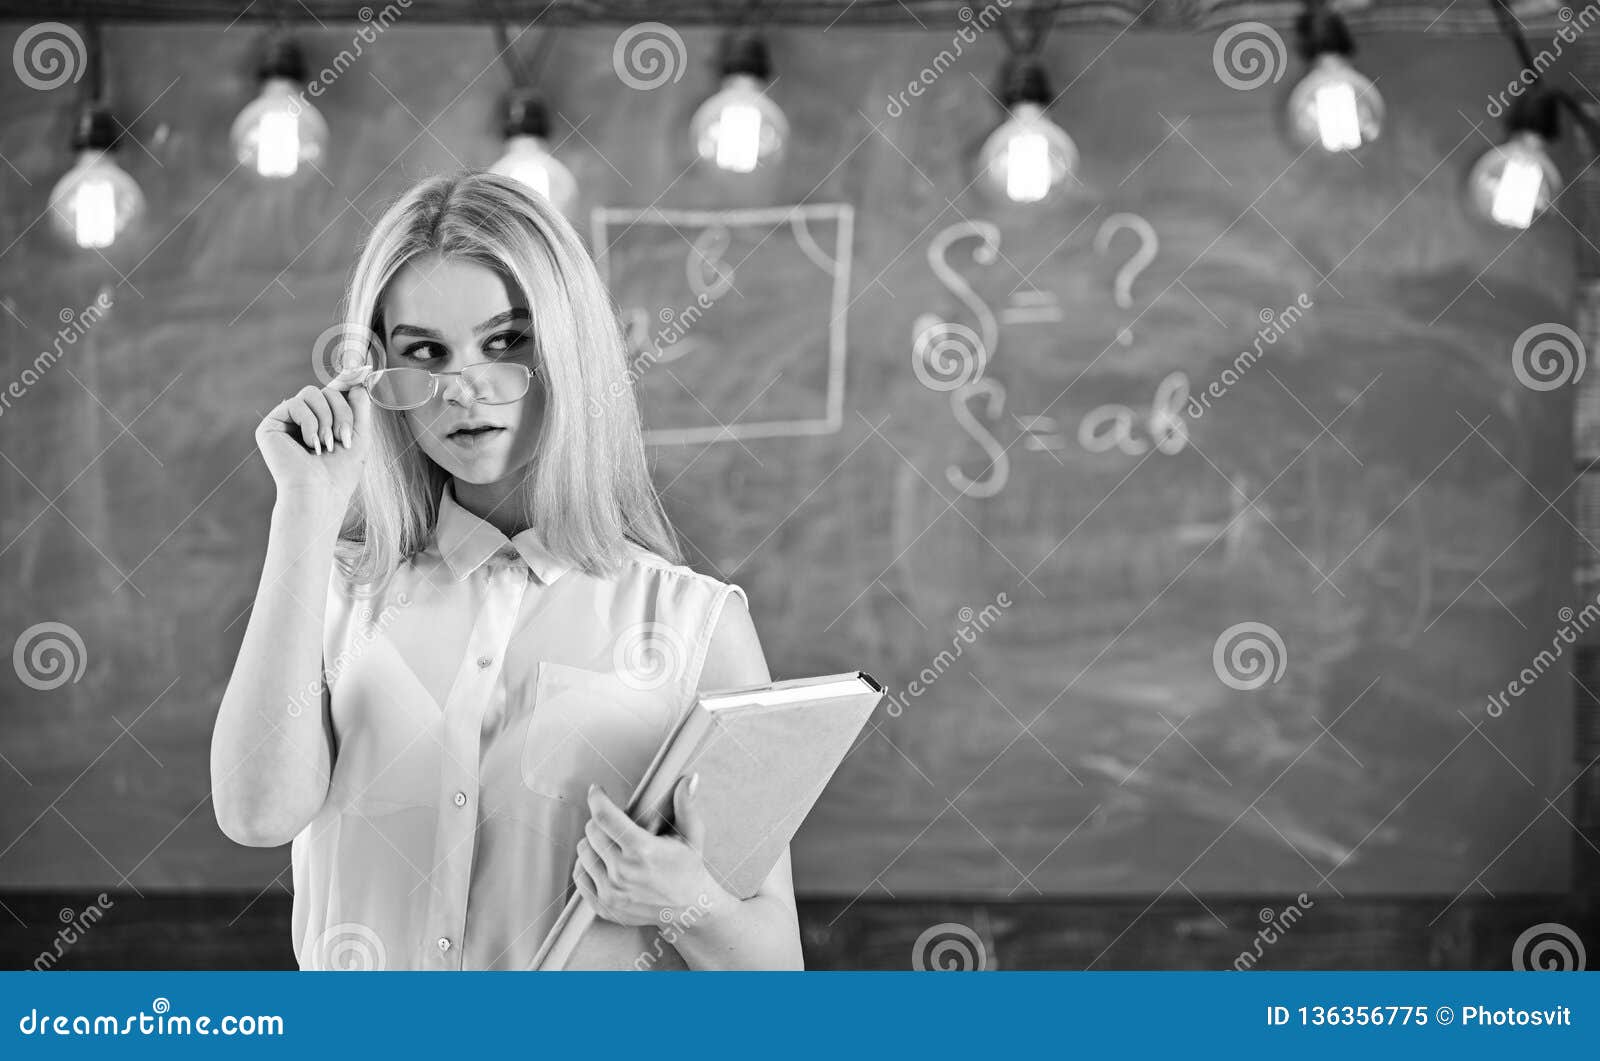 Woman With Book Starts Lesson Gazes At Audience While Taking Off Eyeglasses Teacher Looks